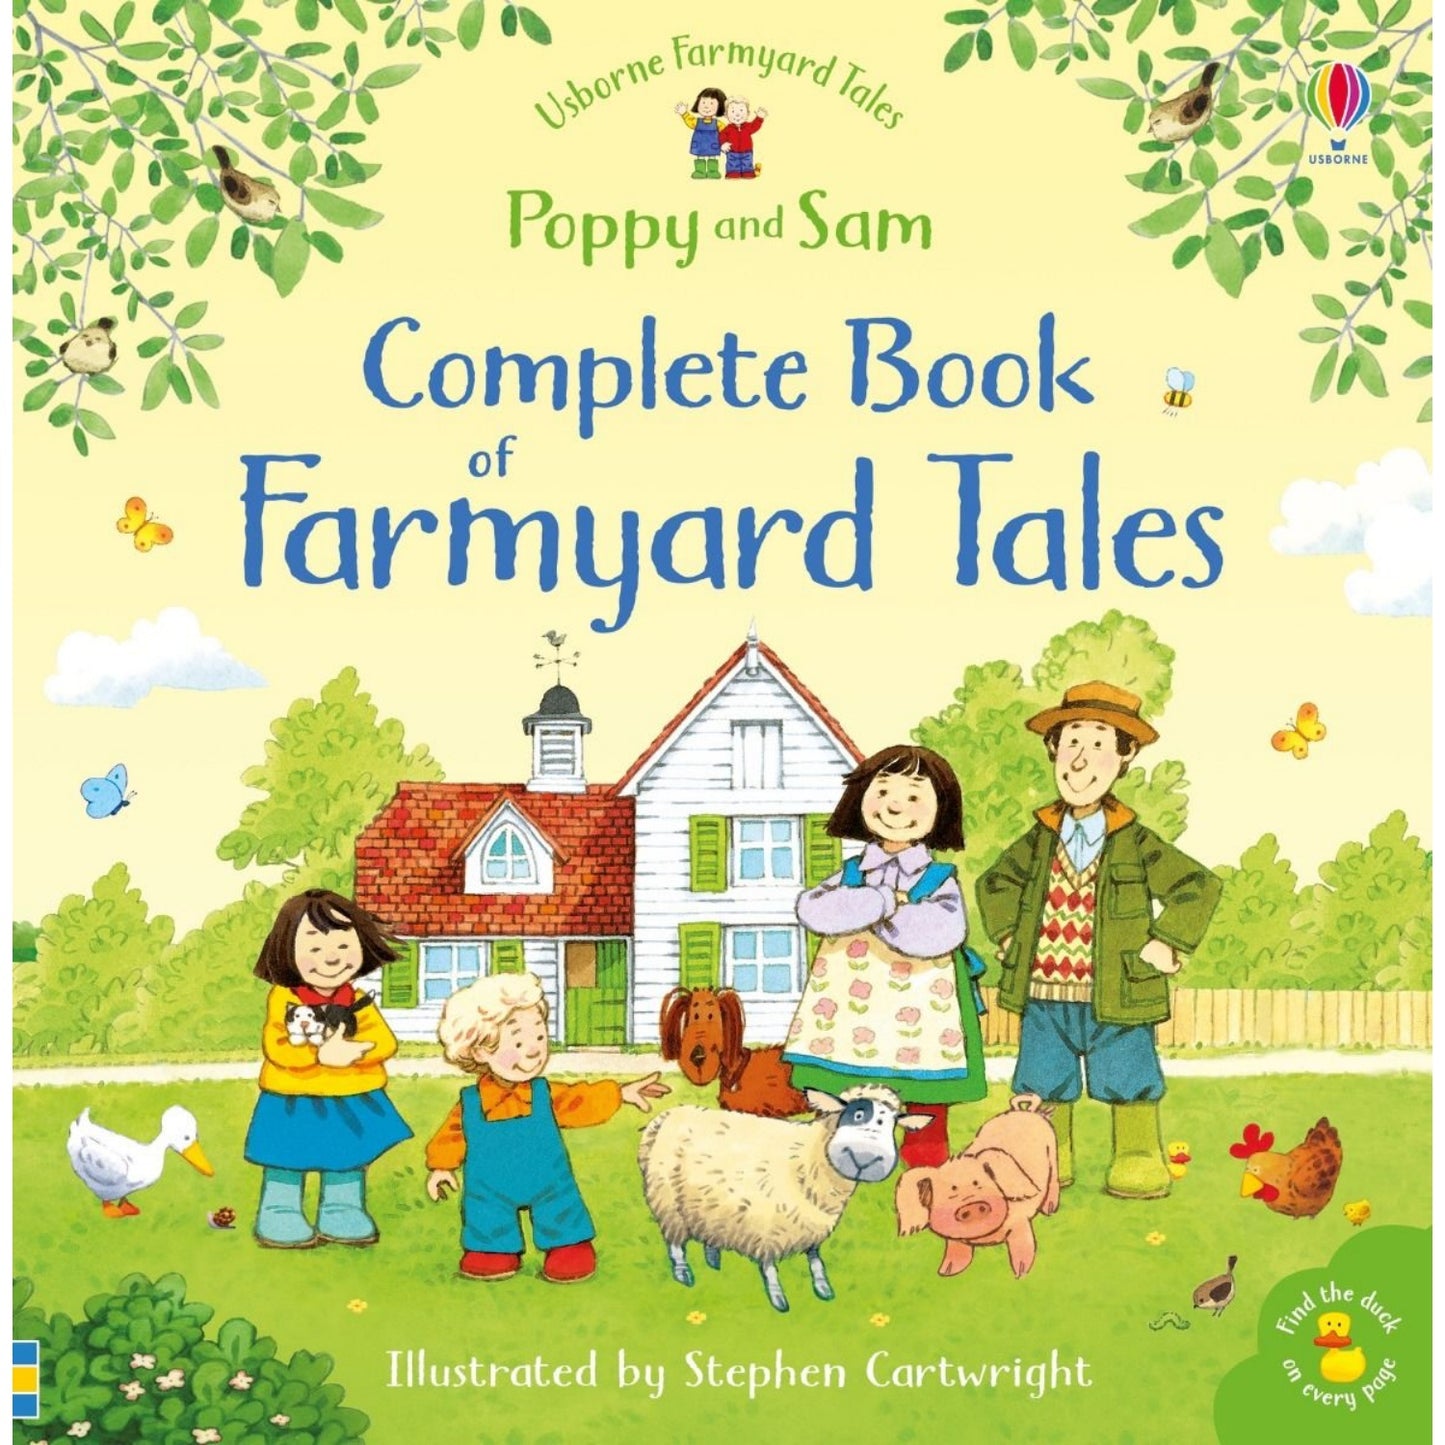 The Complete Book of Farmyard Tales | Children's Book on Farm Life | Usborne | Book Cover | BeoVERDE.ie